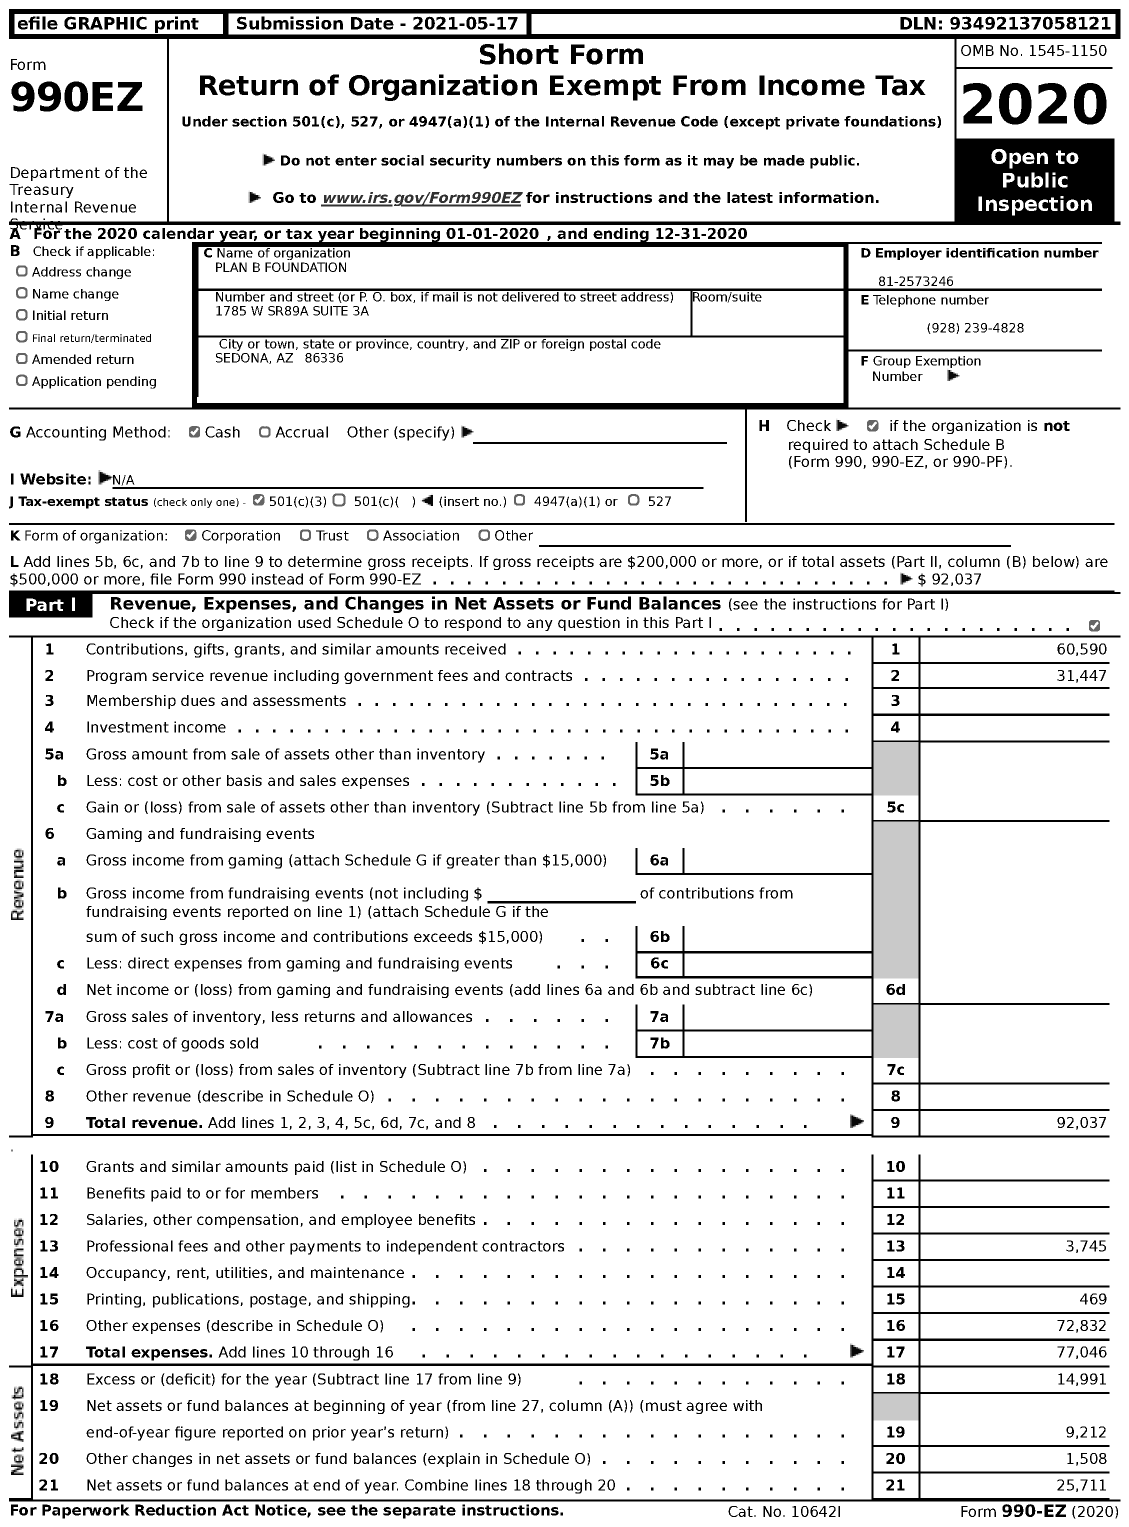 Image of first page of 2020 Form 990EZ for Plan B Foundation